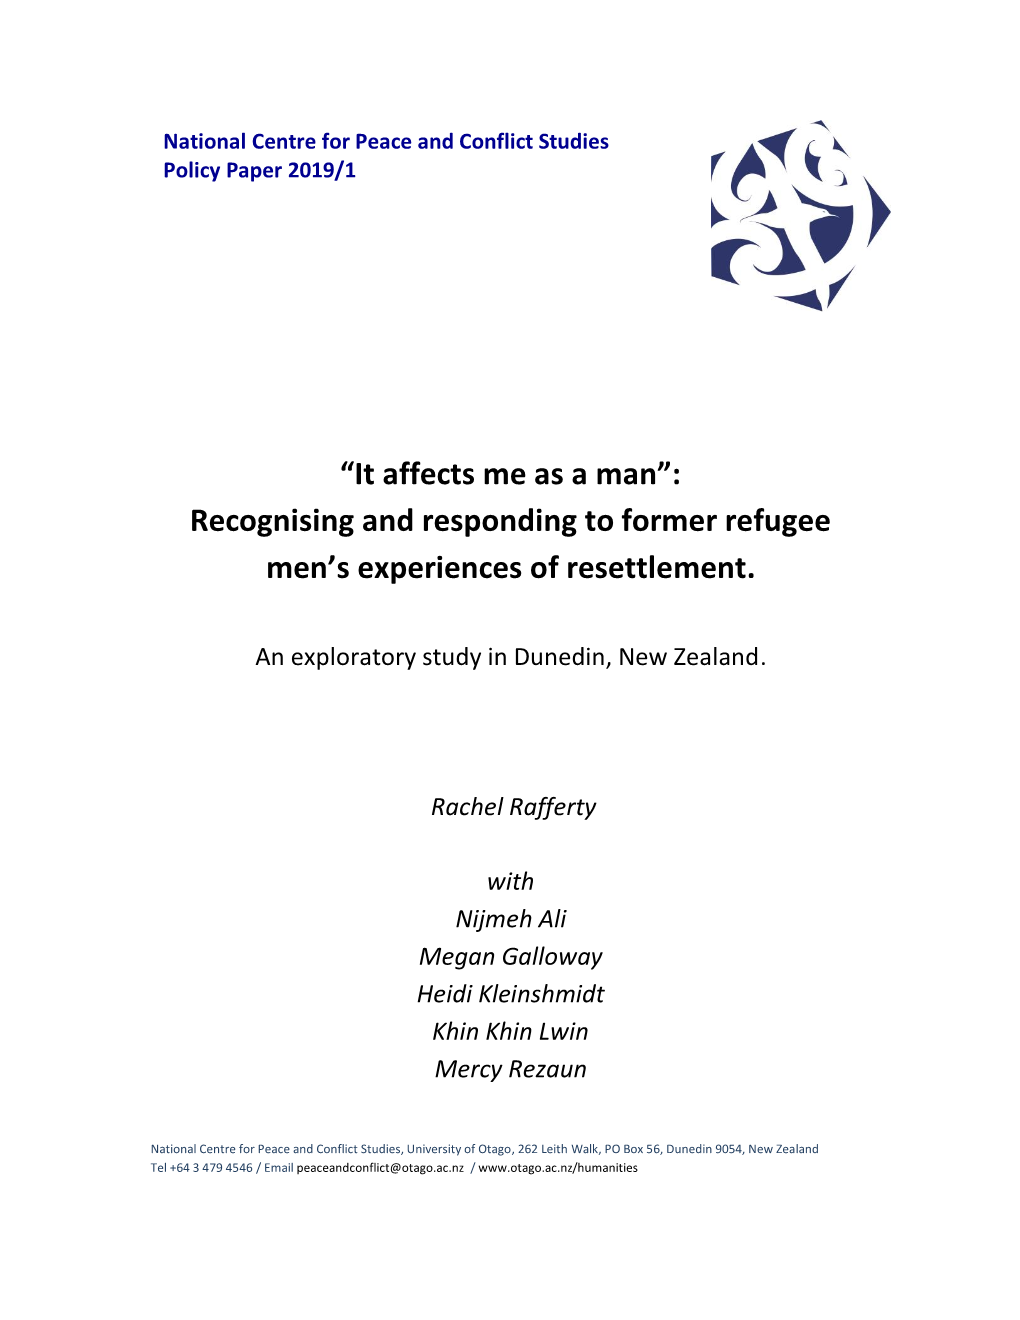 Recognising and Responding to Former Refugee Men's Experiences Of